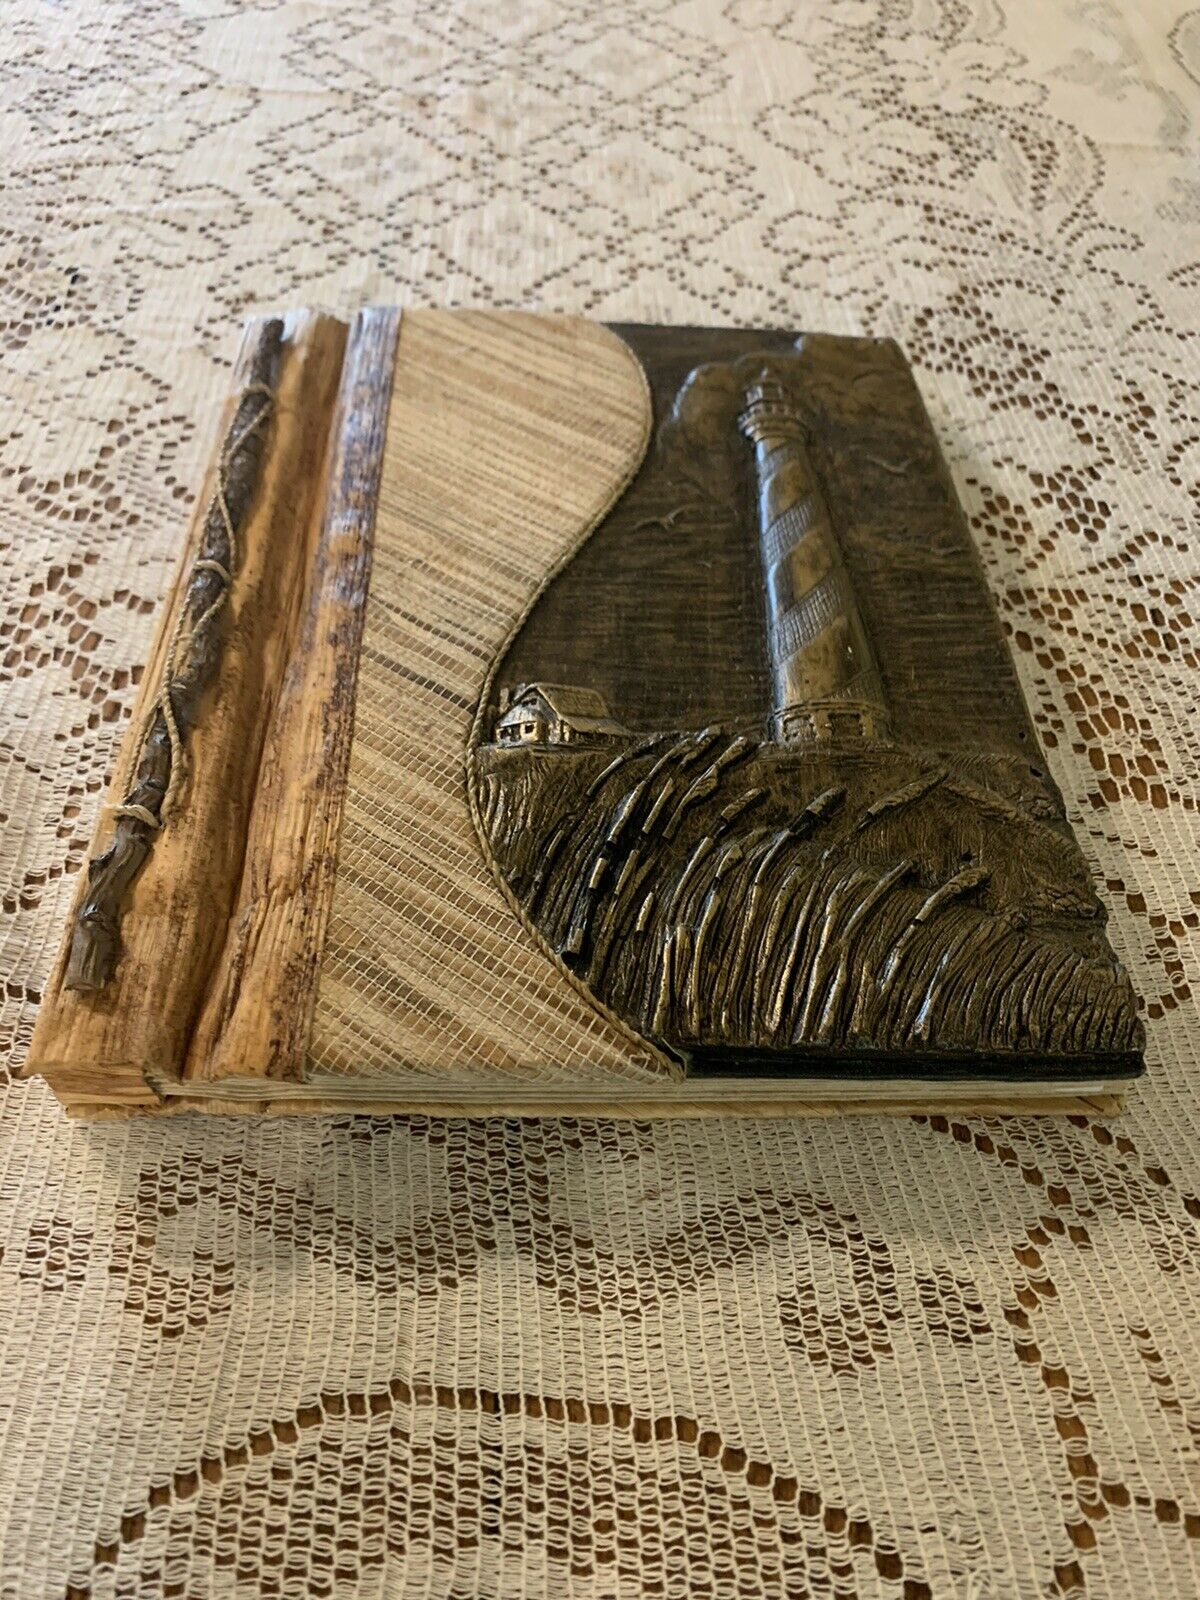 Unique Photo Album With Metal Lighthouse Mold And Woven Reed Cover, Handmade